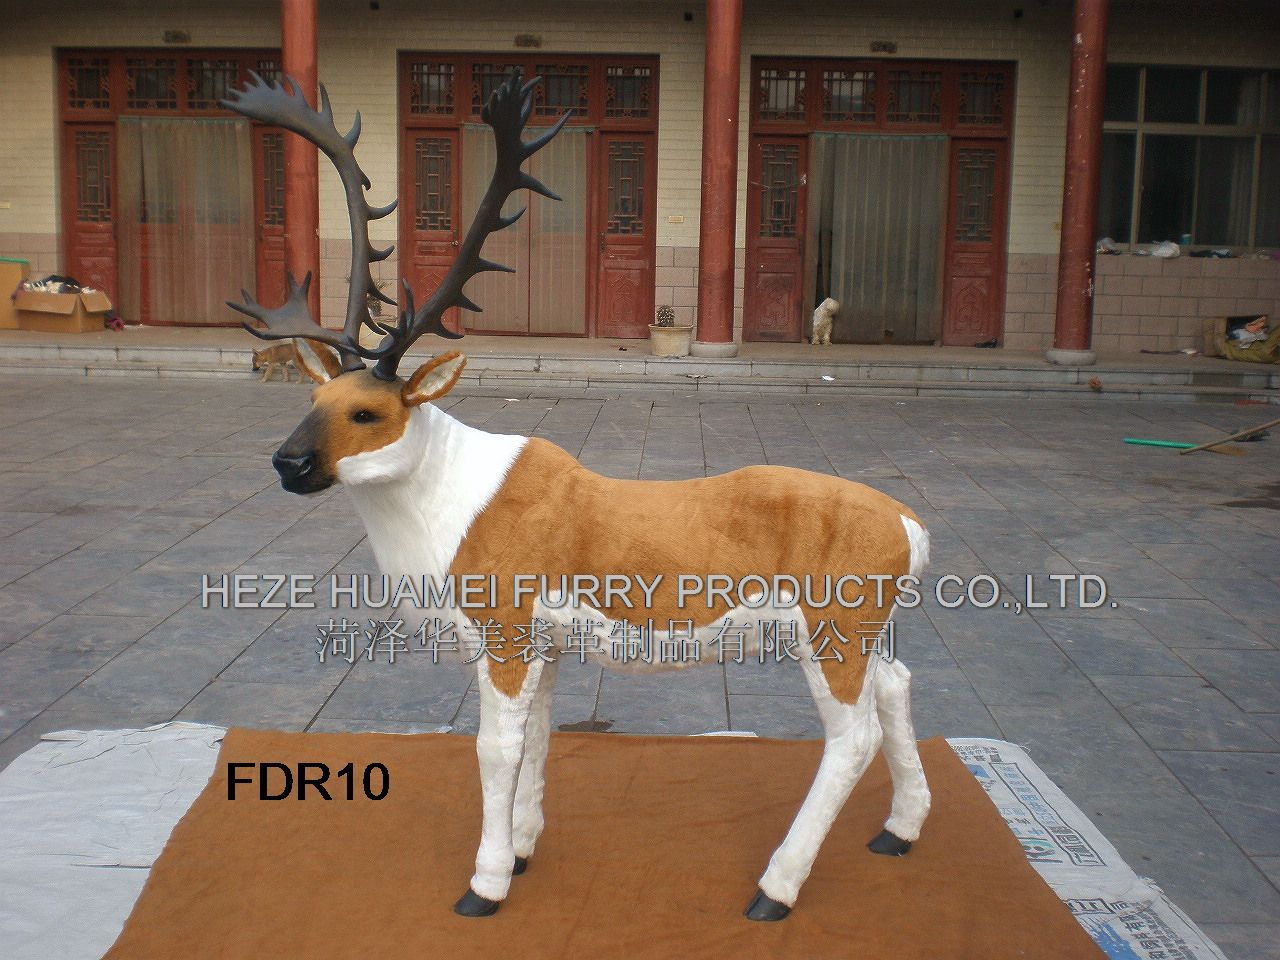 FDR10,HEZE YUHANG FURRY PRODUCTS CO., LTD.